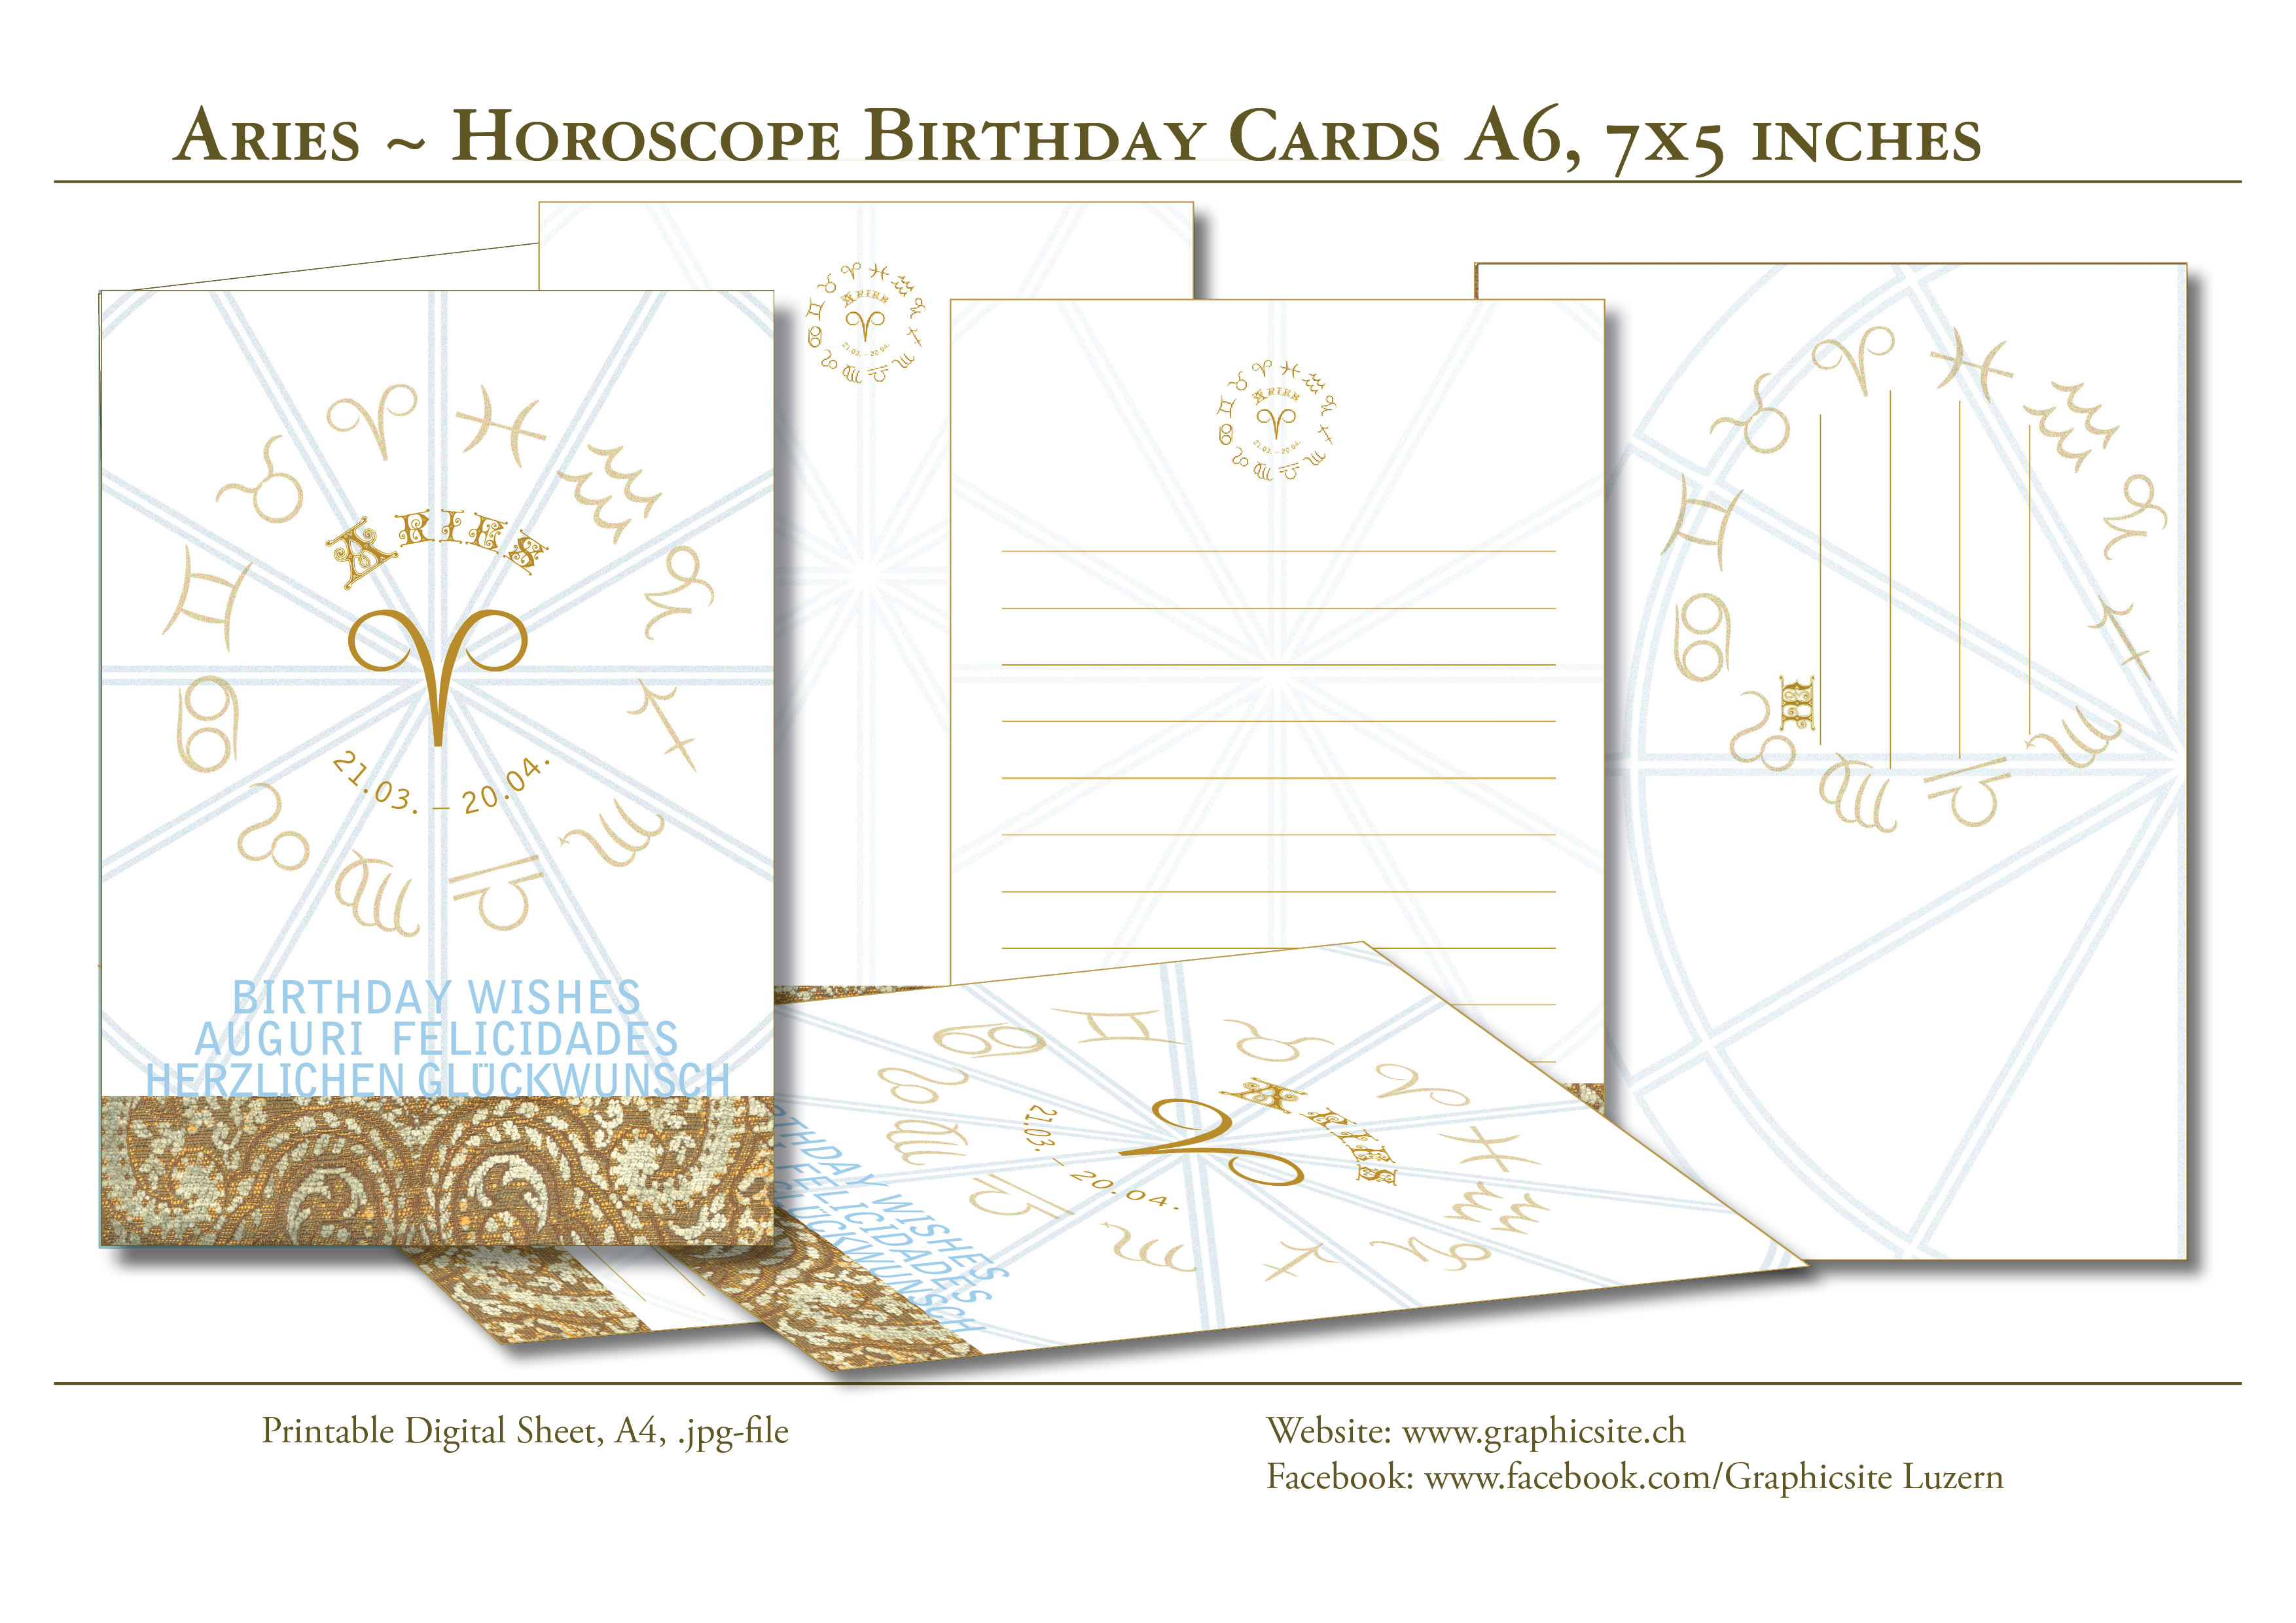 Printable Digital Sheets - Birthday Card Collection - Horoscope - Zodiac - Aries A6 - GraphicDesign, Luzern